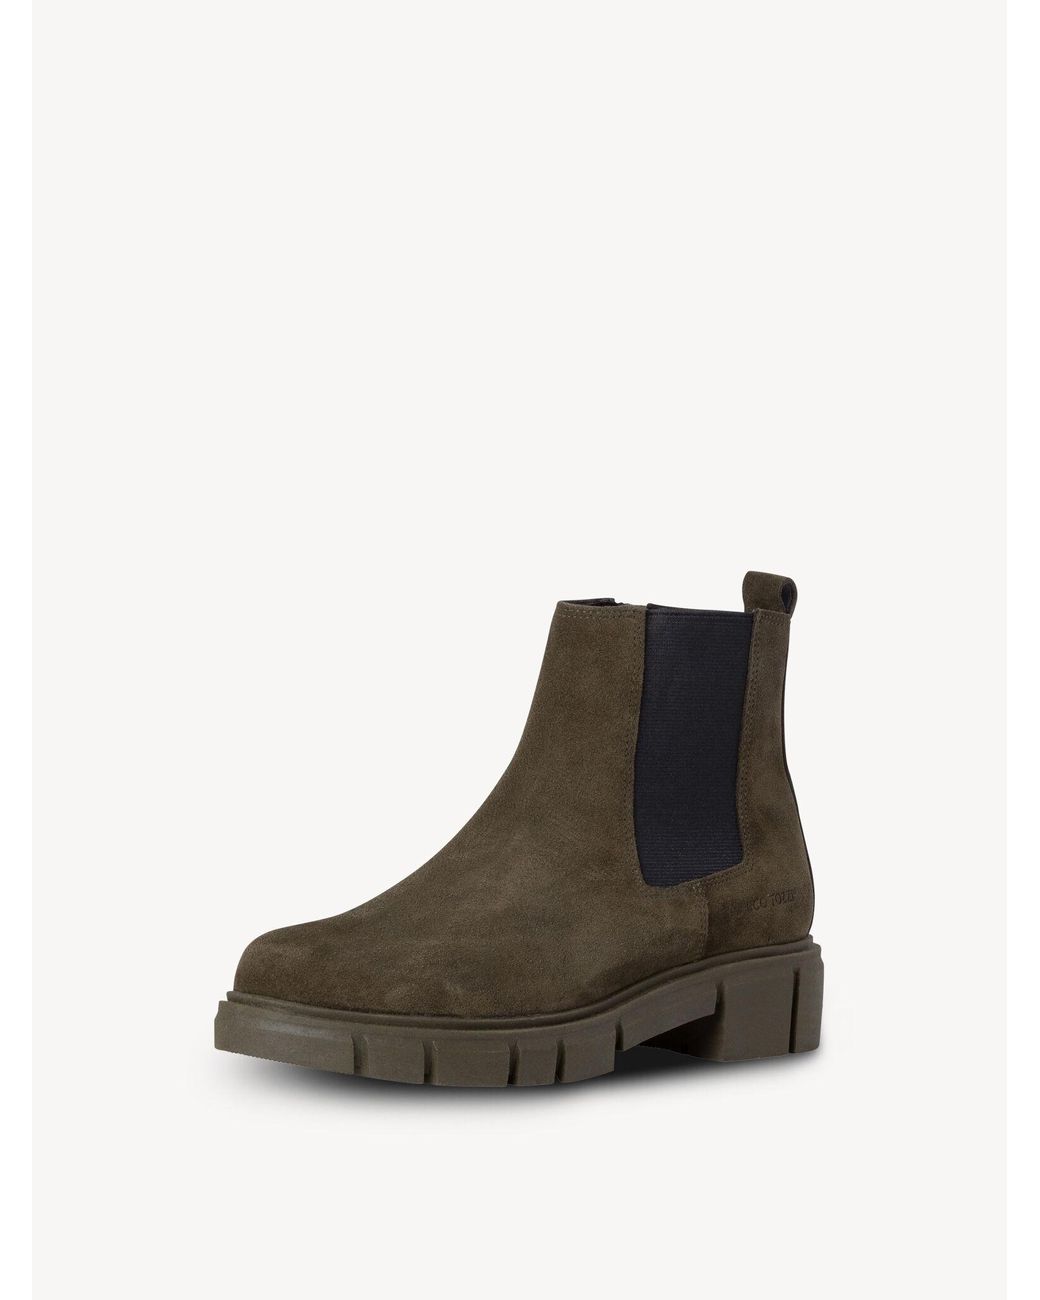 Marco Tozzi Suede Leather Chelsea Boot | Lyst